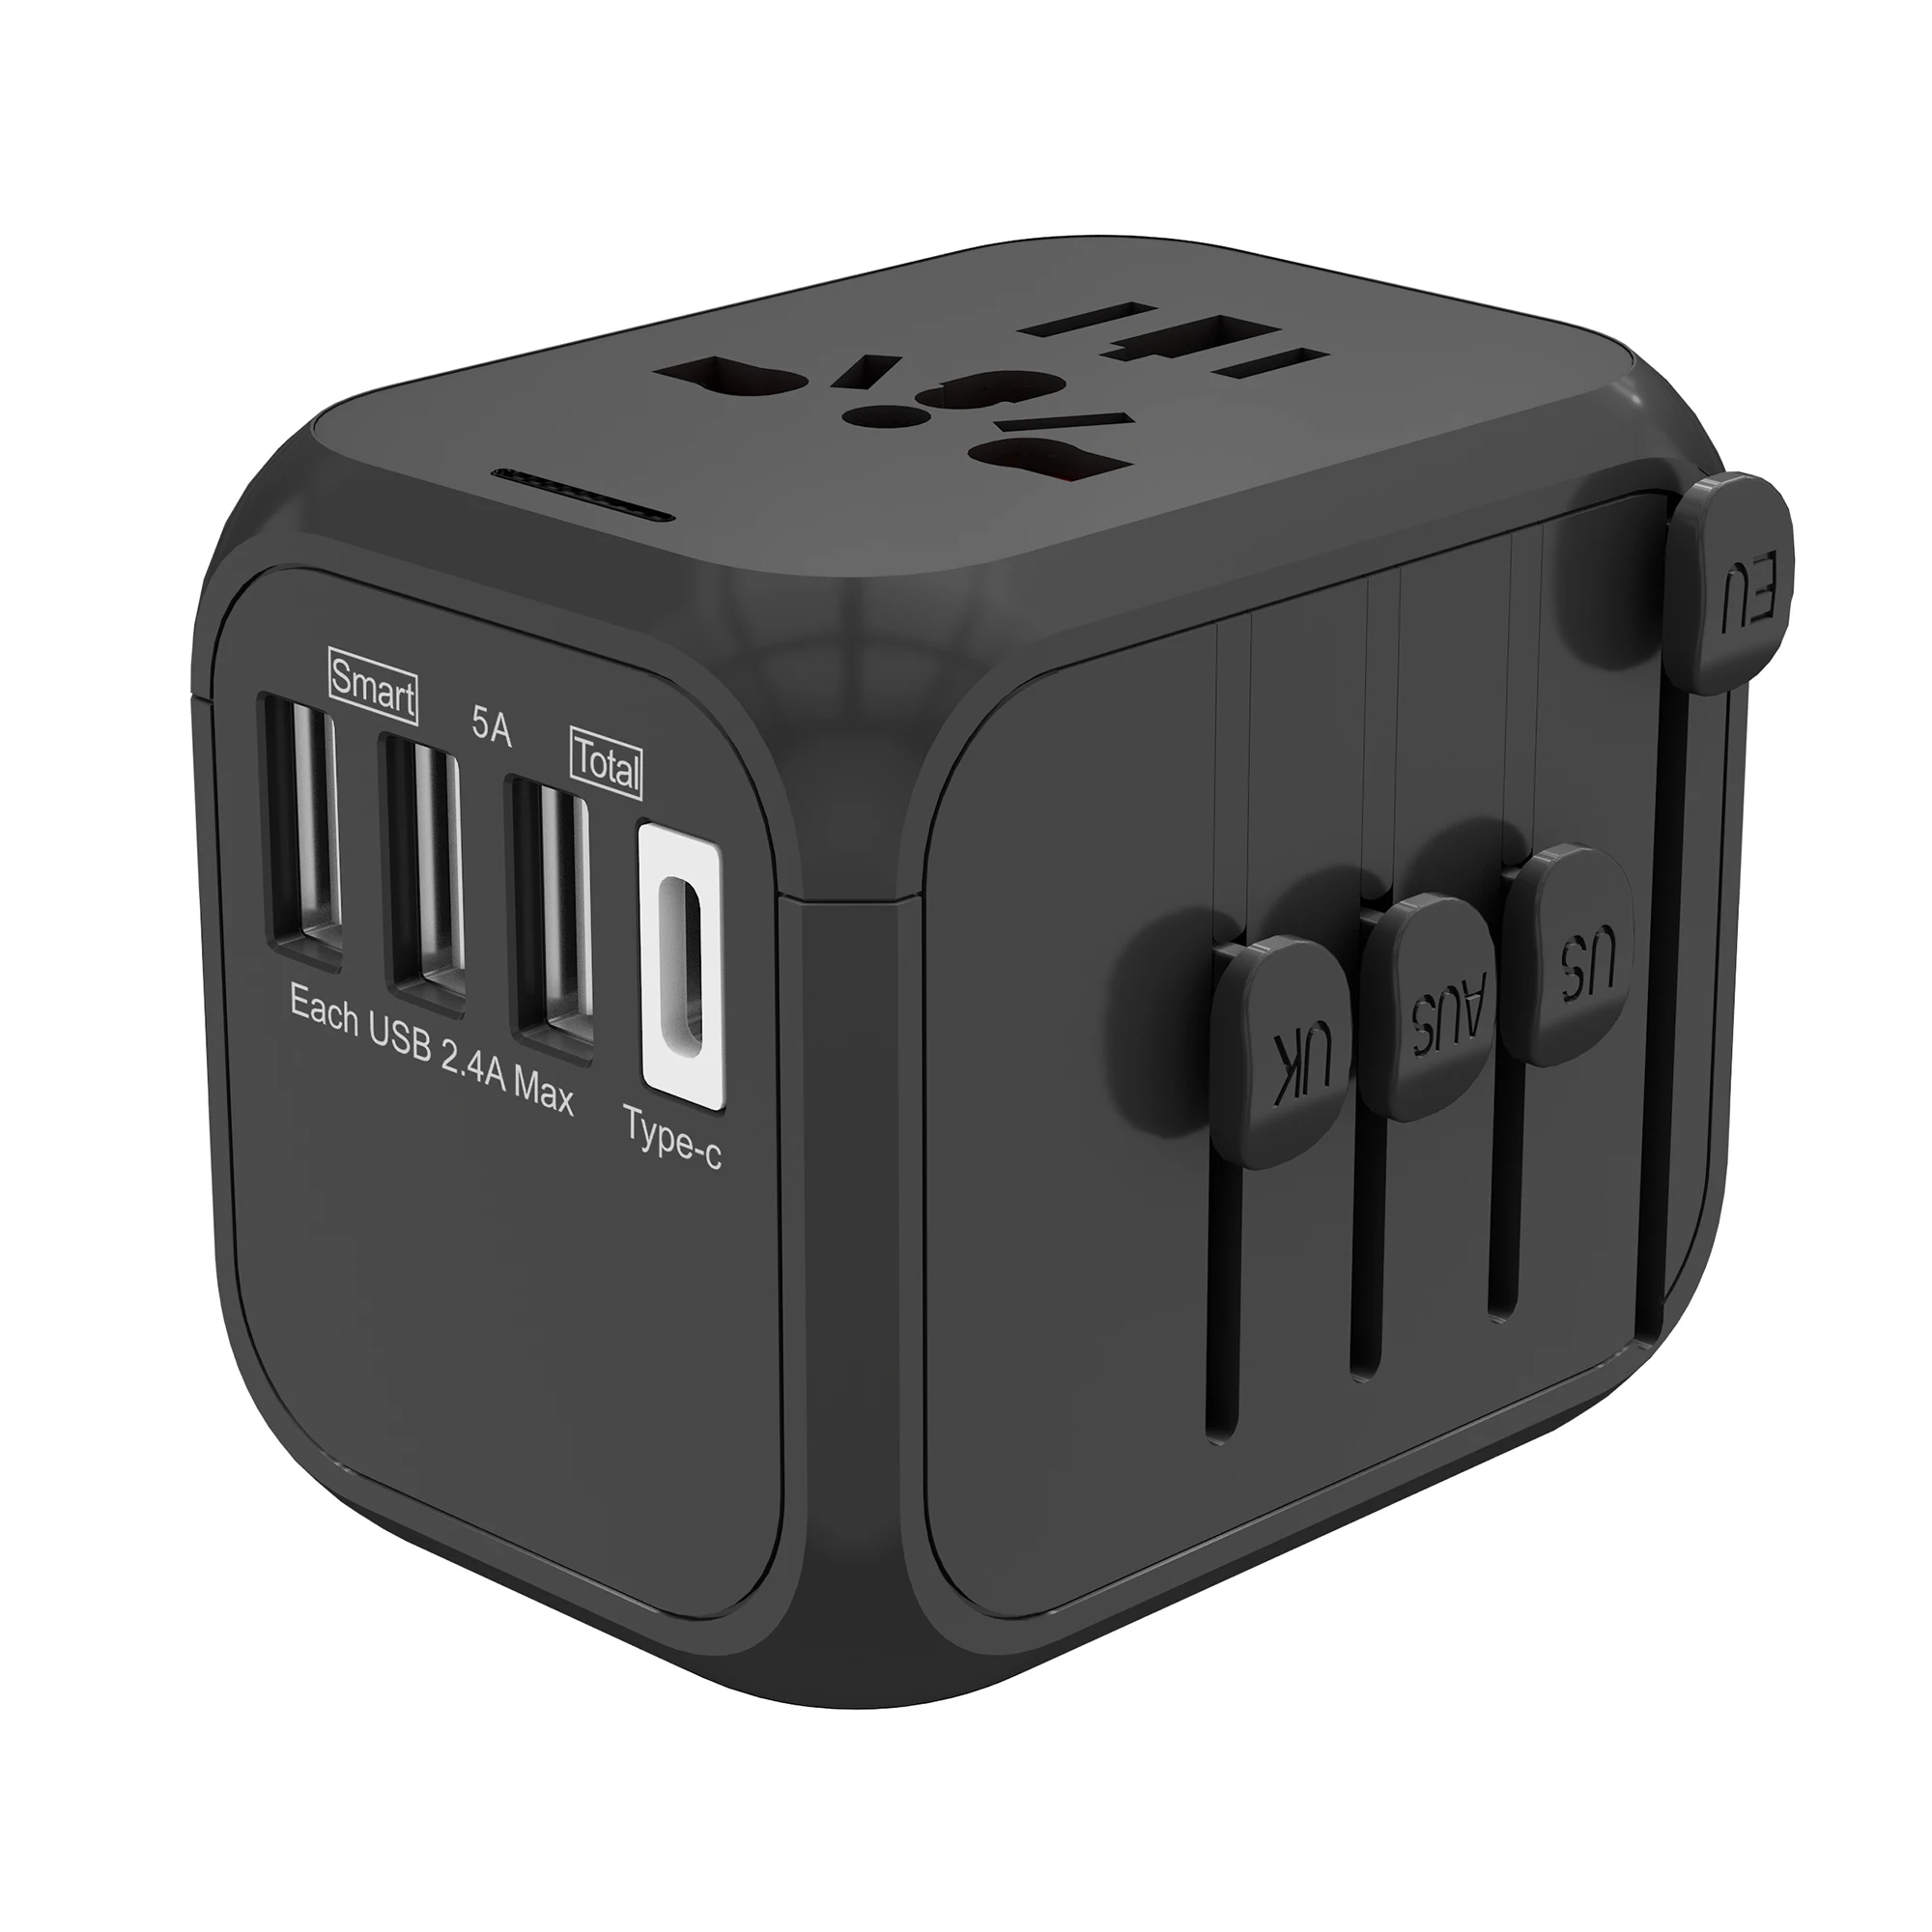 Mobile phone accessories multi-nation travel power adapter world universal travel adaptor with 4 USB charger For EU UK US AUS